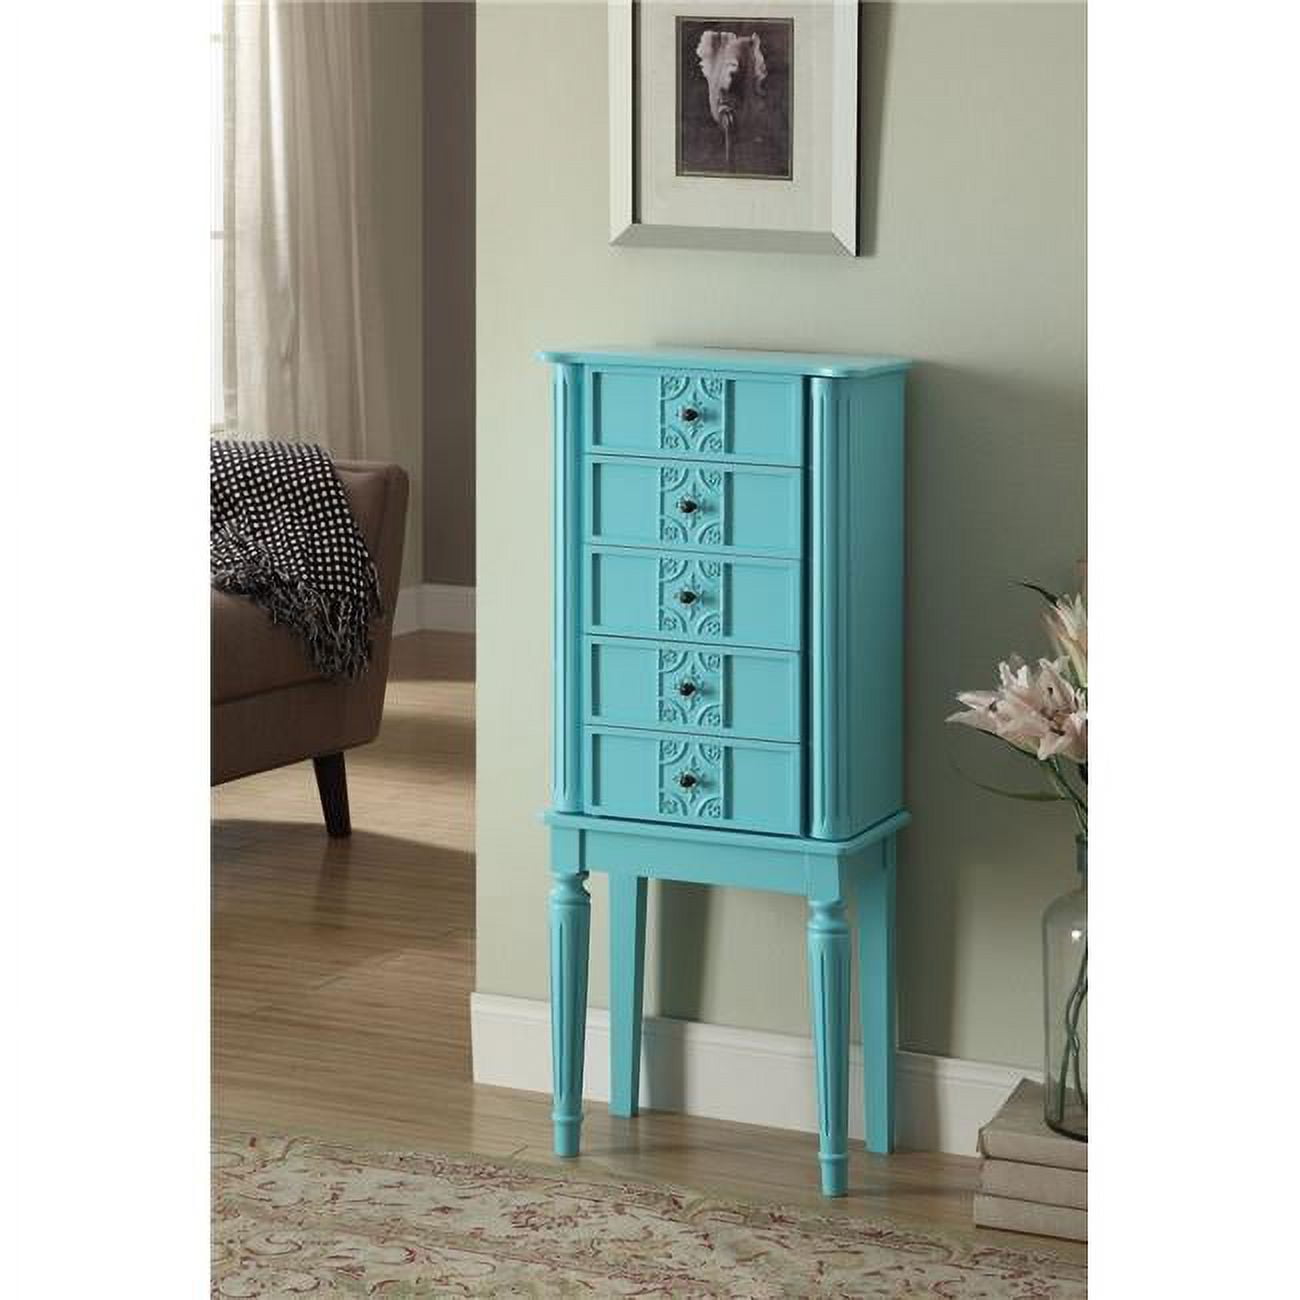 Bm177735 Wood Jewelry Armoire With 5 Drawers, Light Blue - 40 X 10 X 16 In.